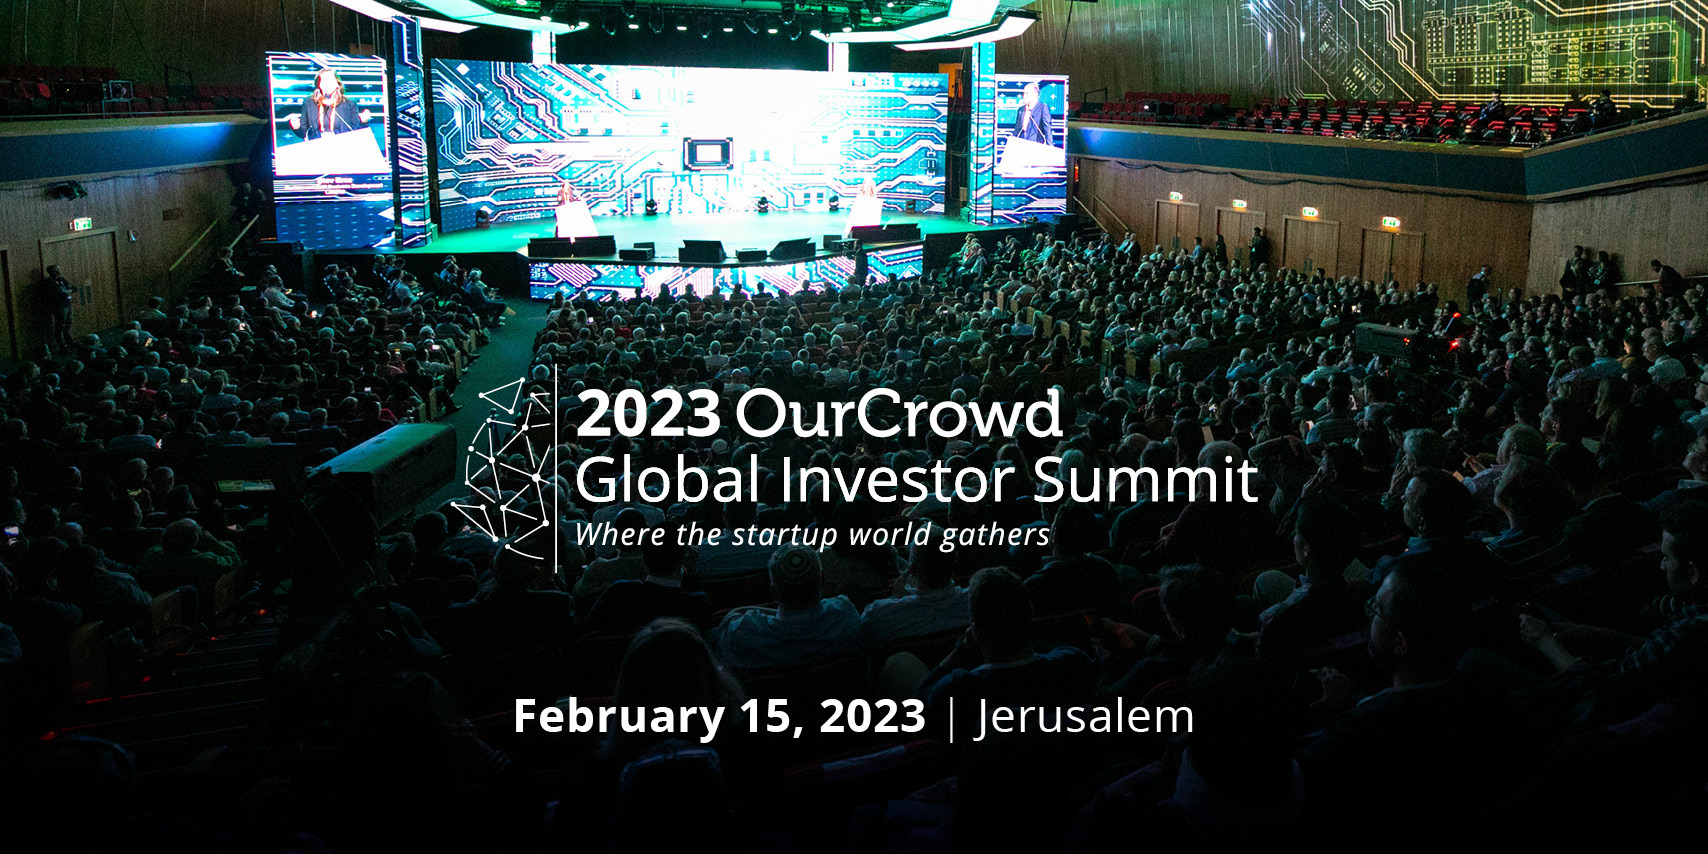 2023 OurCrowd Global Investor Summit Info OurCrowd Events